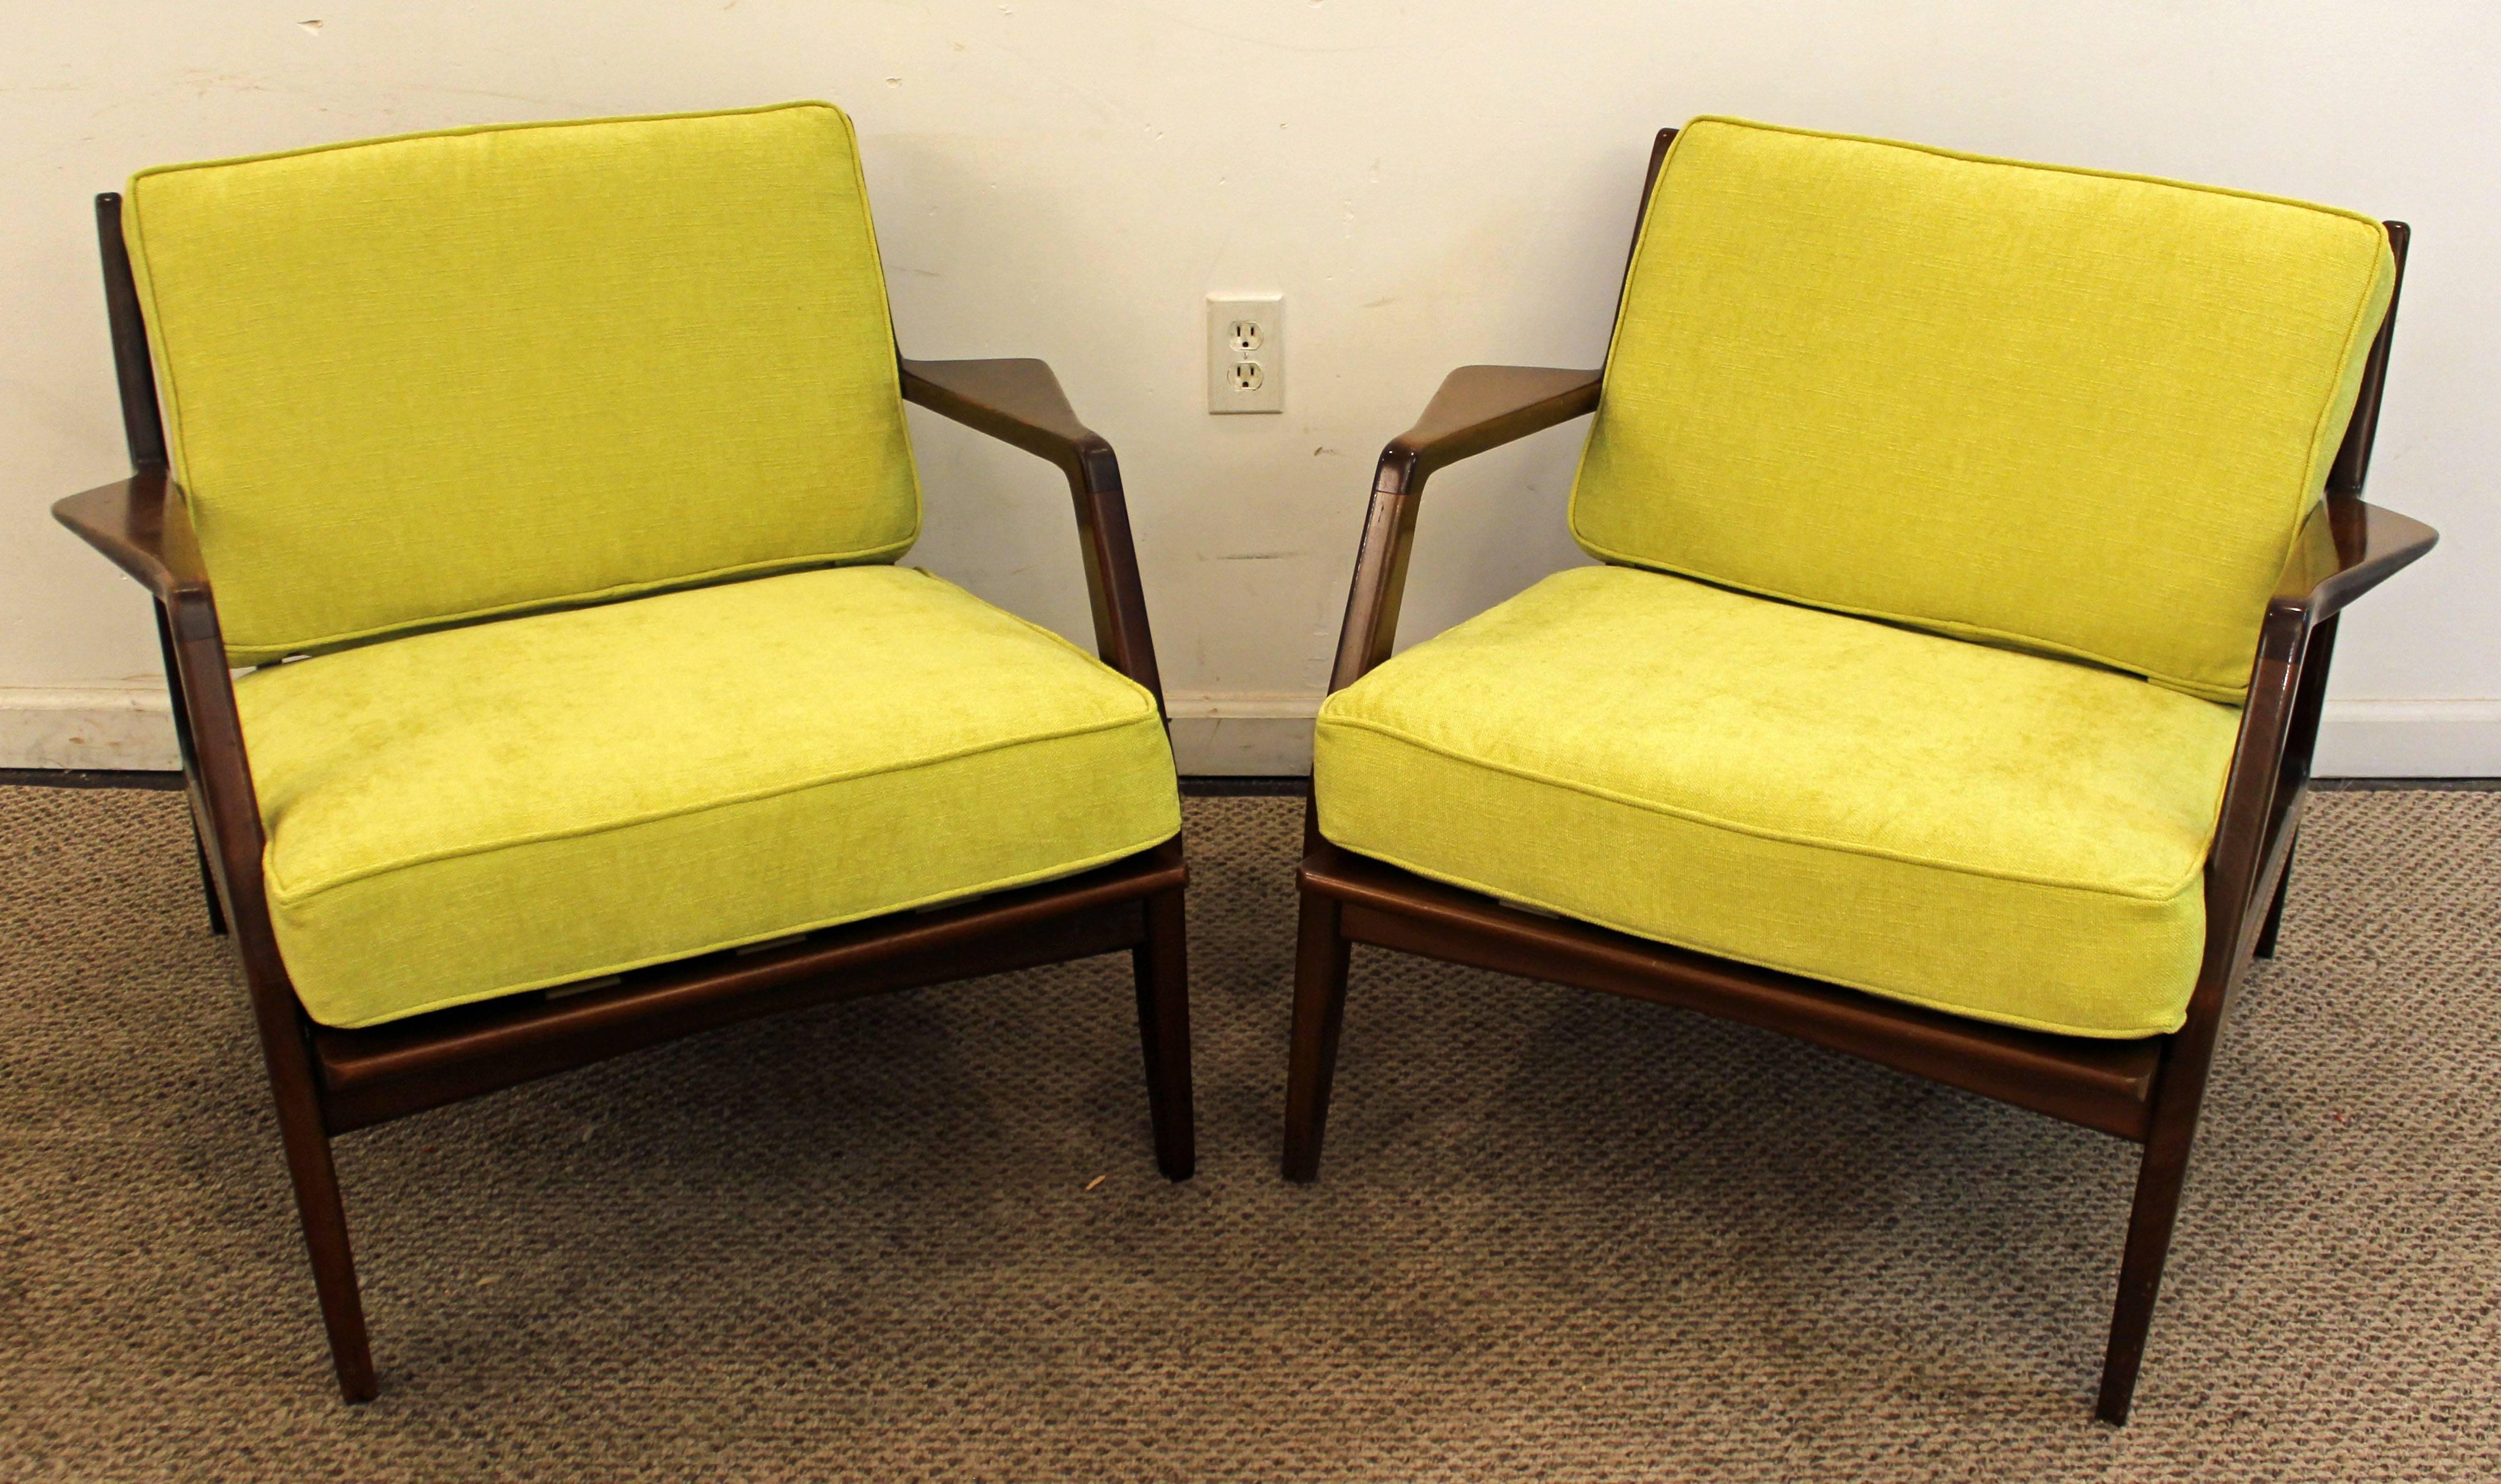 The set includes two open arm walnut lounge or accent chairs. They have been reupholstered with 'citron' fabric. We believe they may be earlier unsigned copies of IB Kofod Larsen chairs, but we are unsure. 

Measures: 30.5